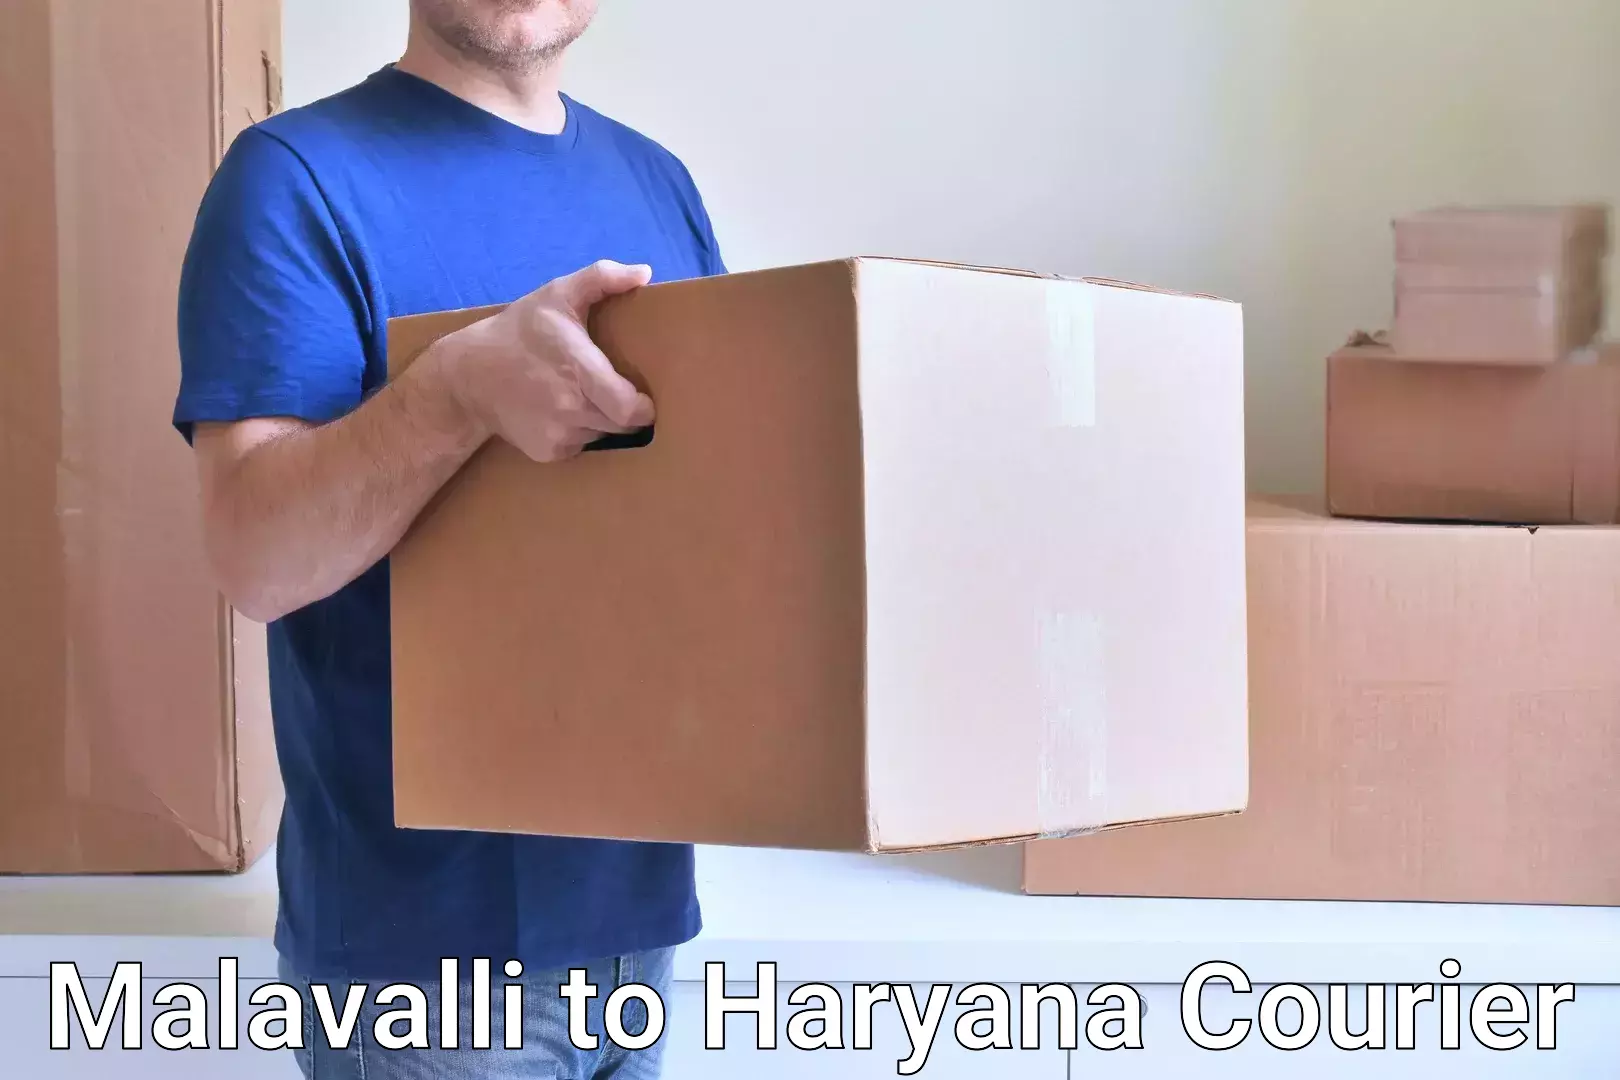 Same-day delivery options Malavalli to Haryana